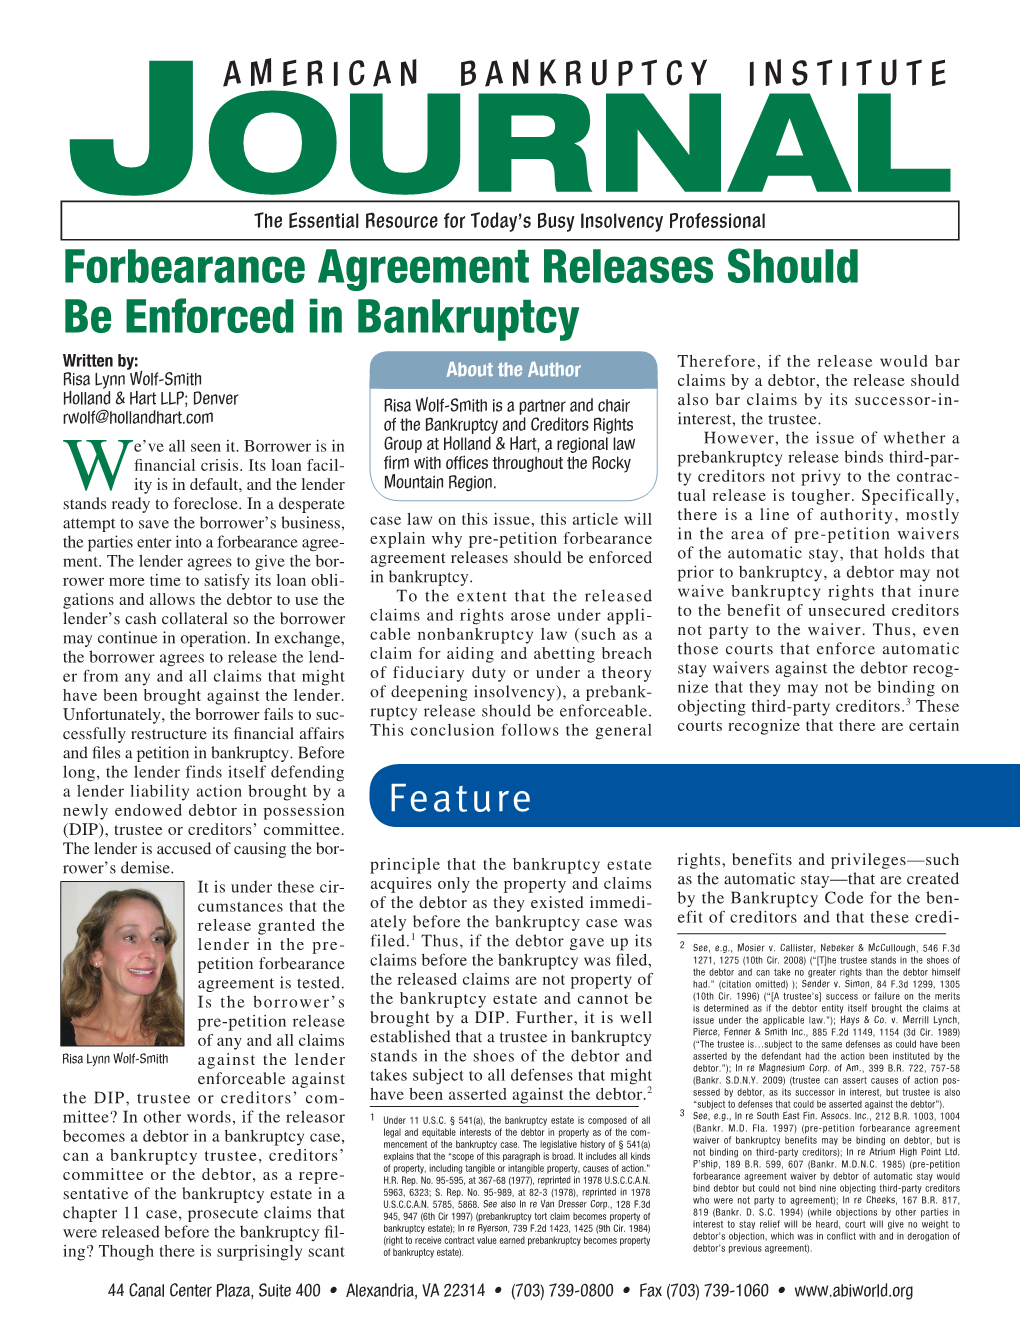 Forbearance Agreement Releases Should Be Enforced in Bankruptcy